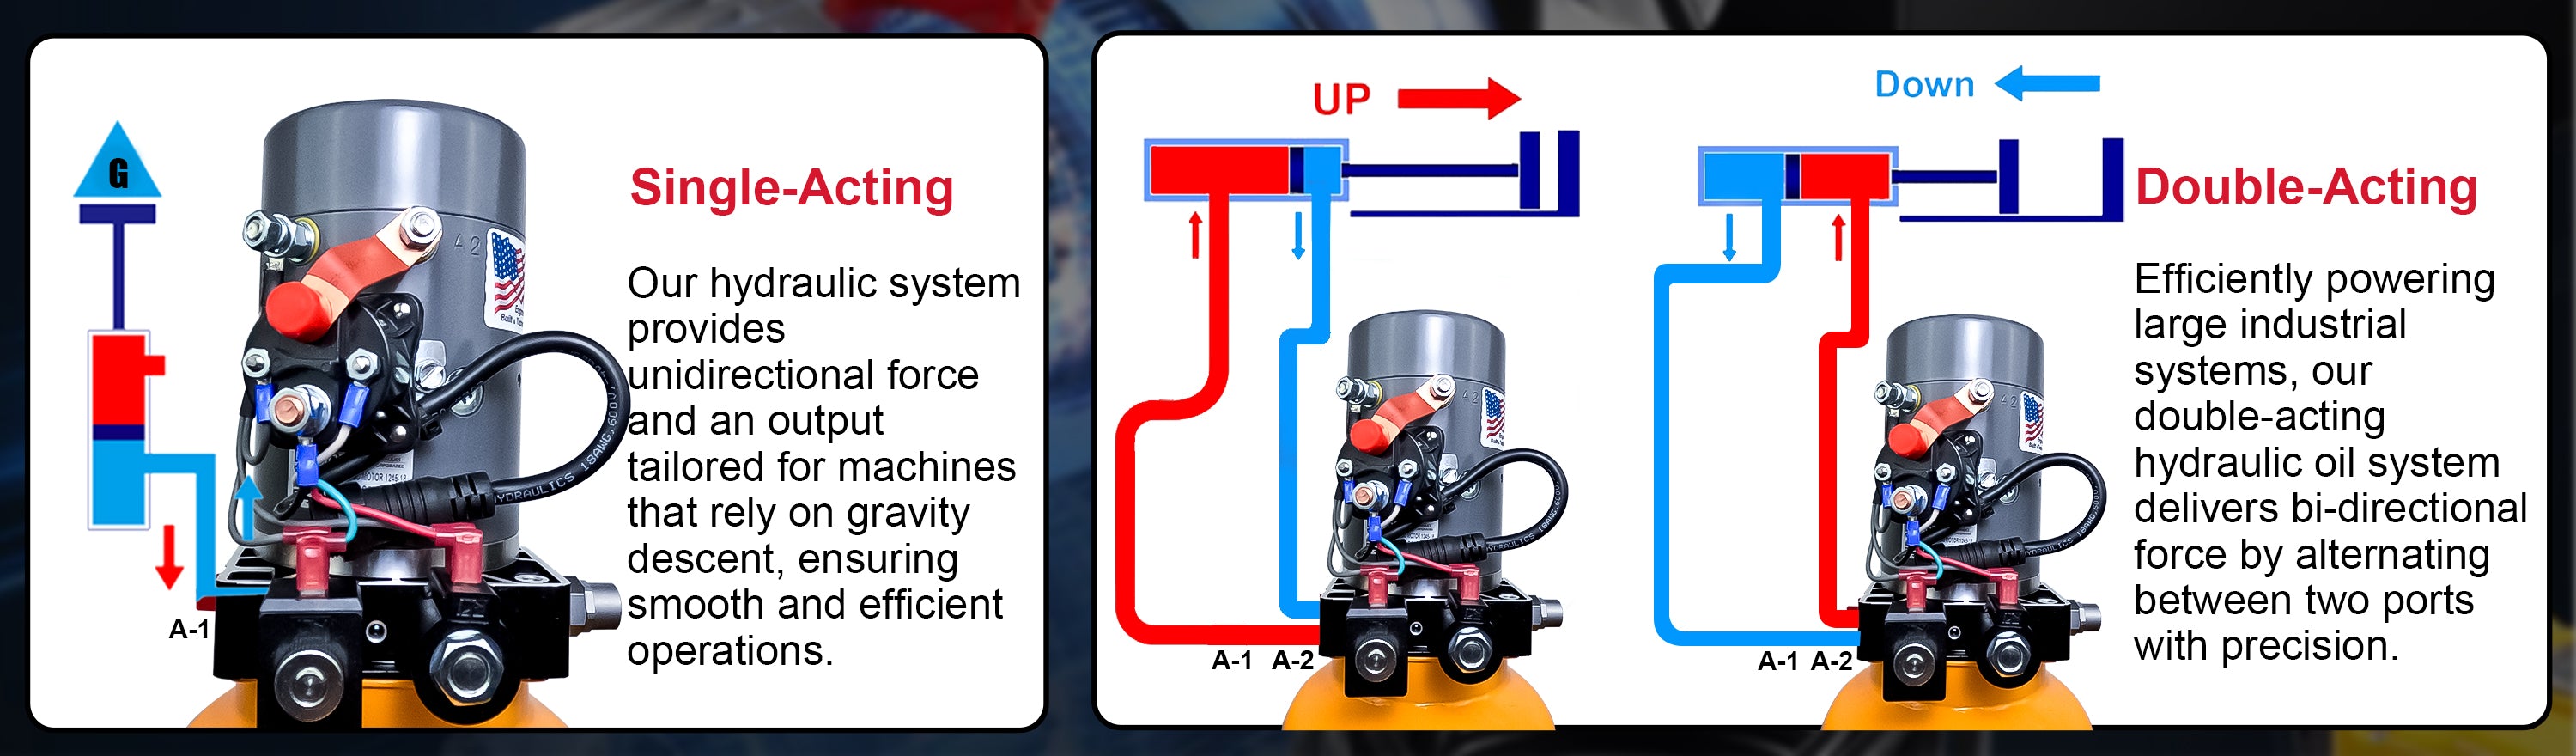 KTI 12V Double-Acting Hydraulic Pump - Steel Reservoir, shown in a detailed diagram, highlighting its robust components and efficient dual-action functionality for hydraulic dump bed systems.